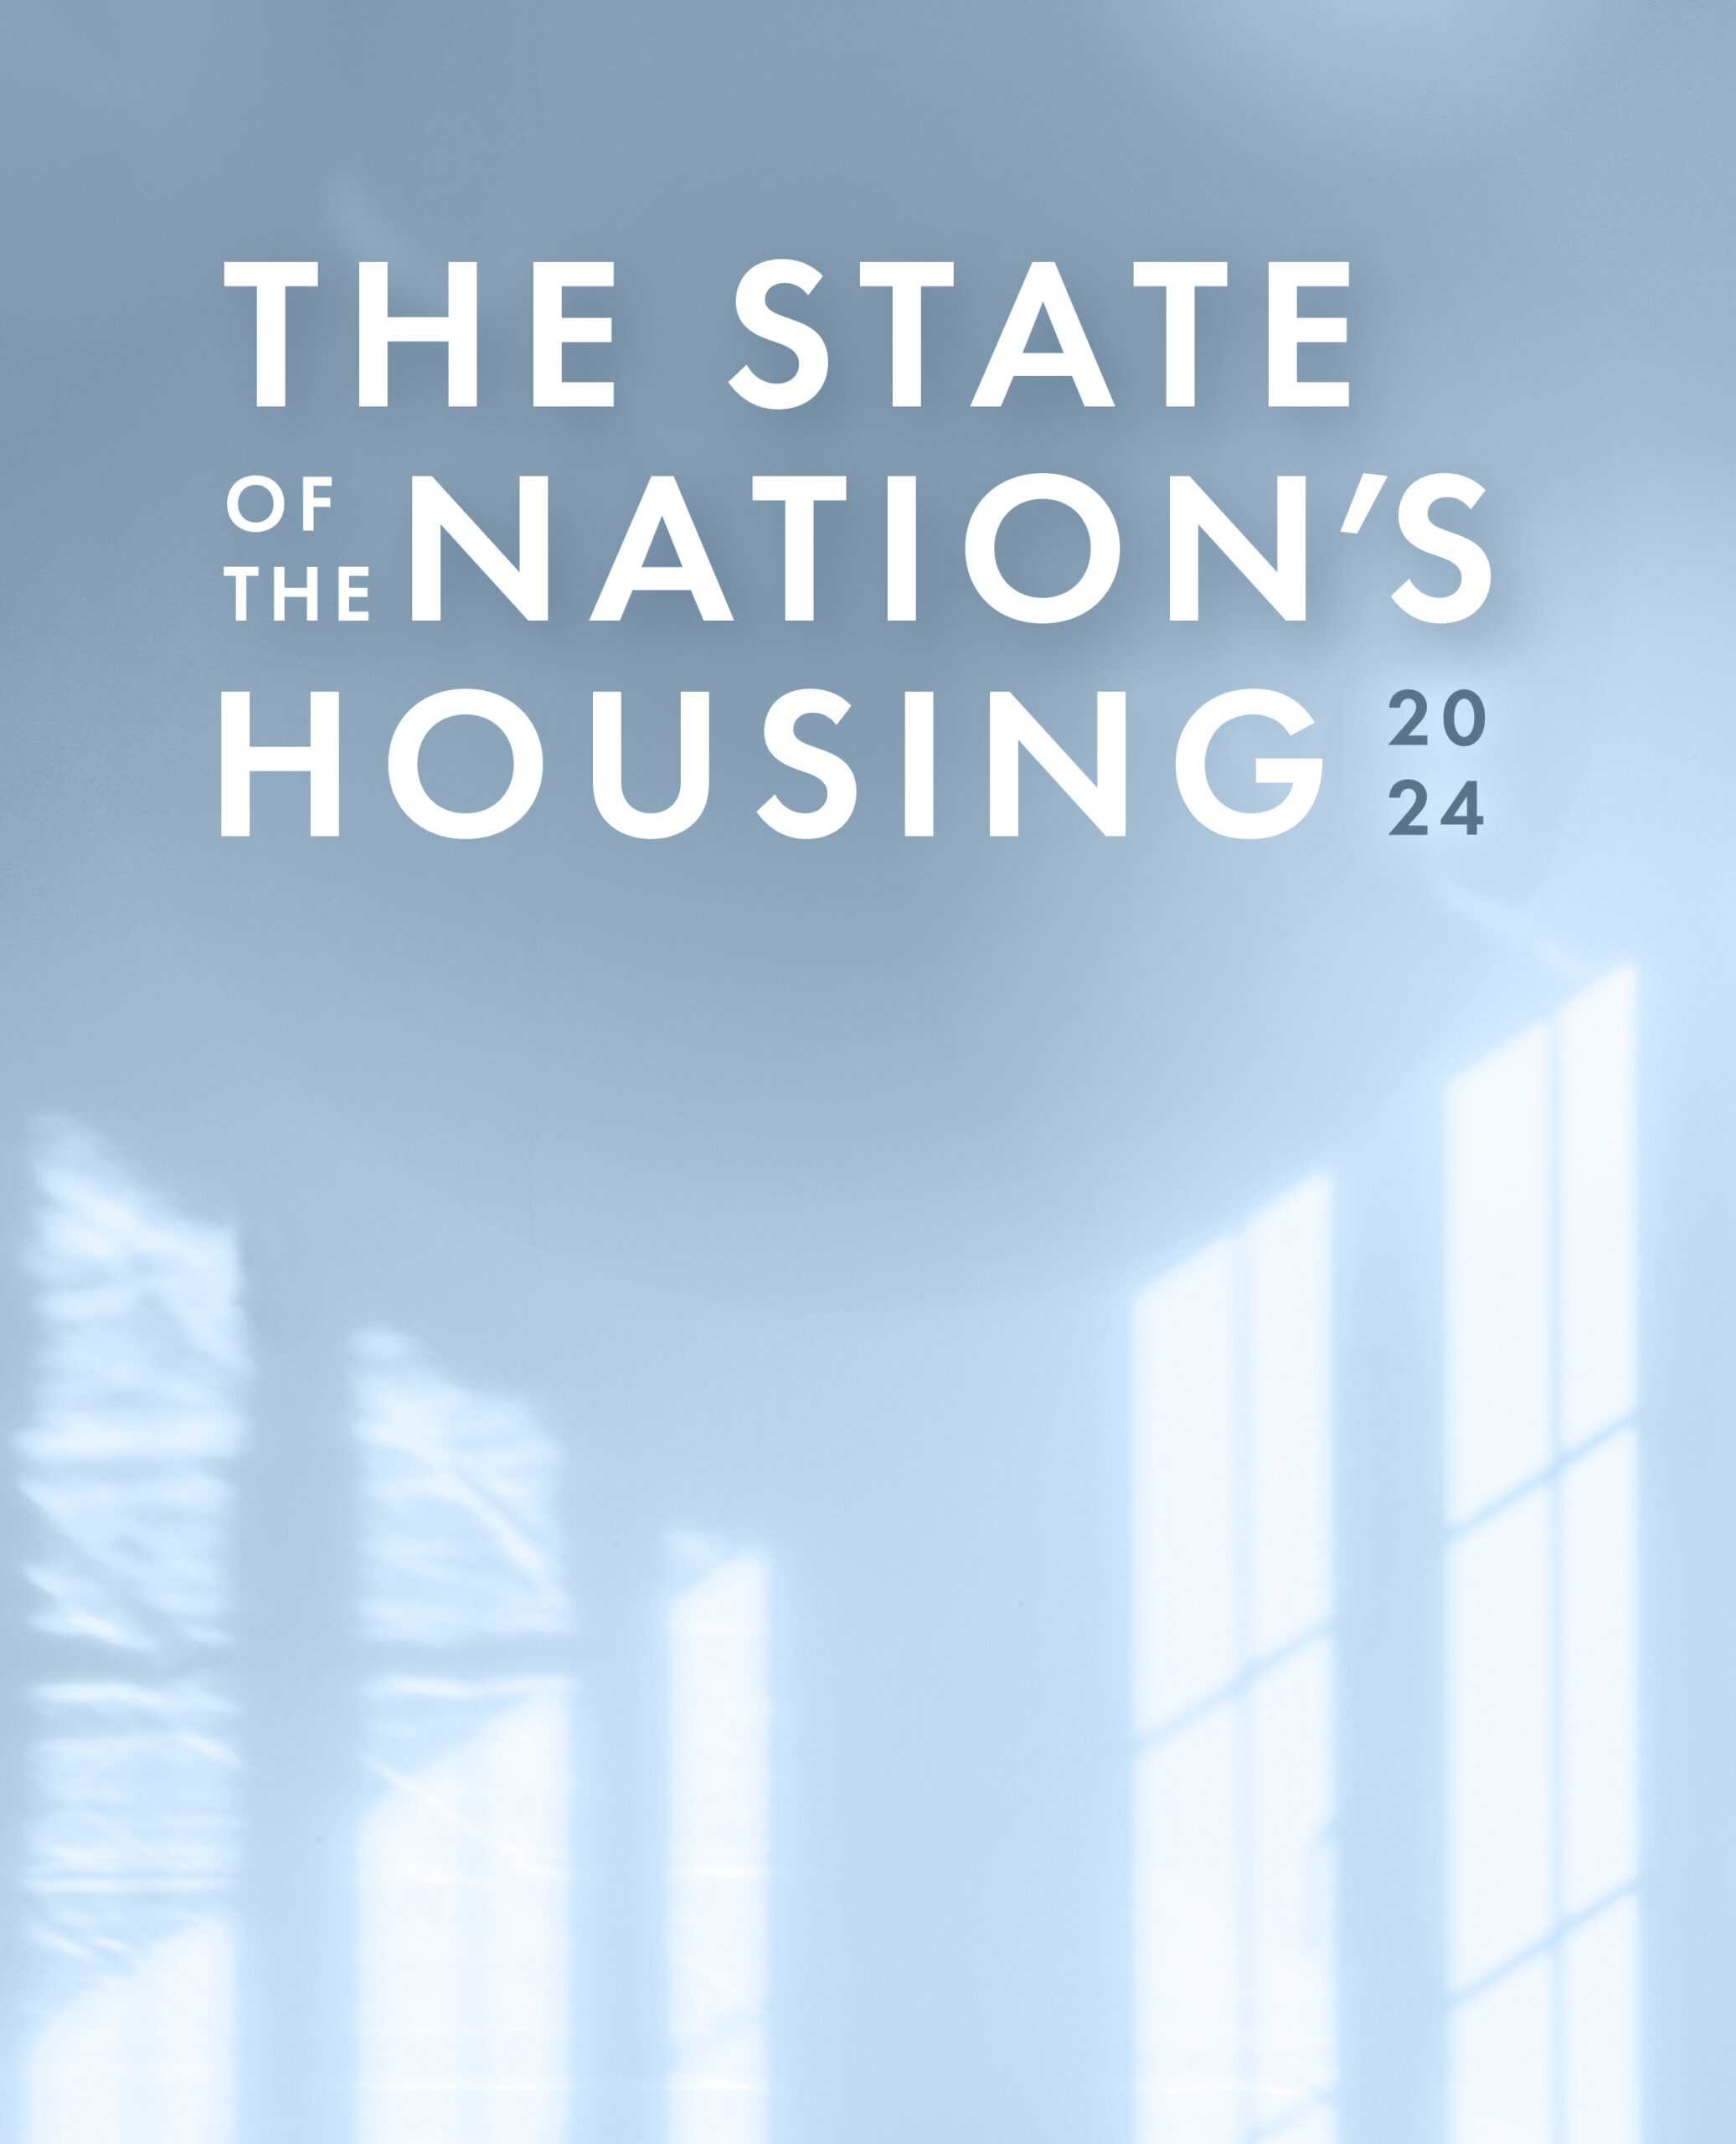 Reflections on the State of the Nation’s Housing report